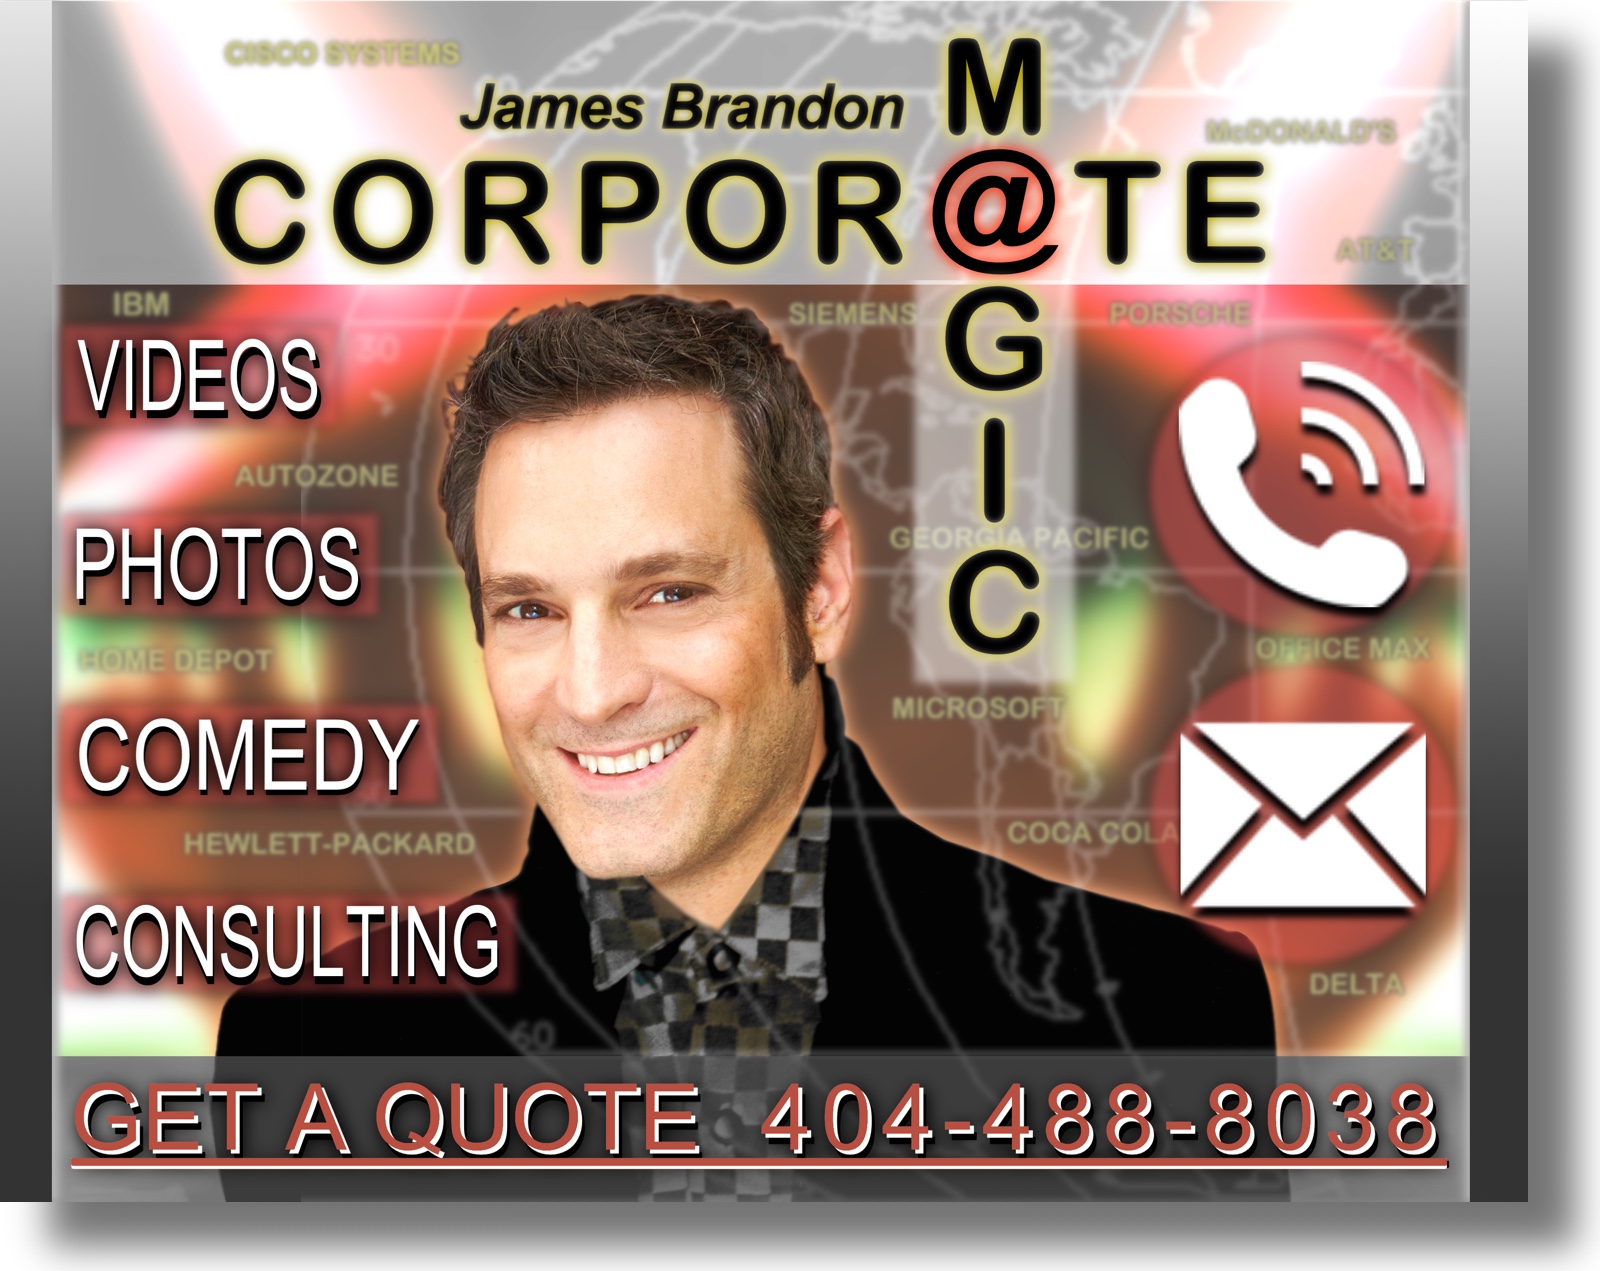 Clean Comedy Magician Corporate Comedy Magician in Palm Beach, Coral Gables, Coconut Grove, Key West, Naples, Key Largo and Pinecrest Florida